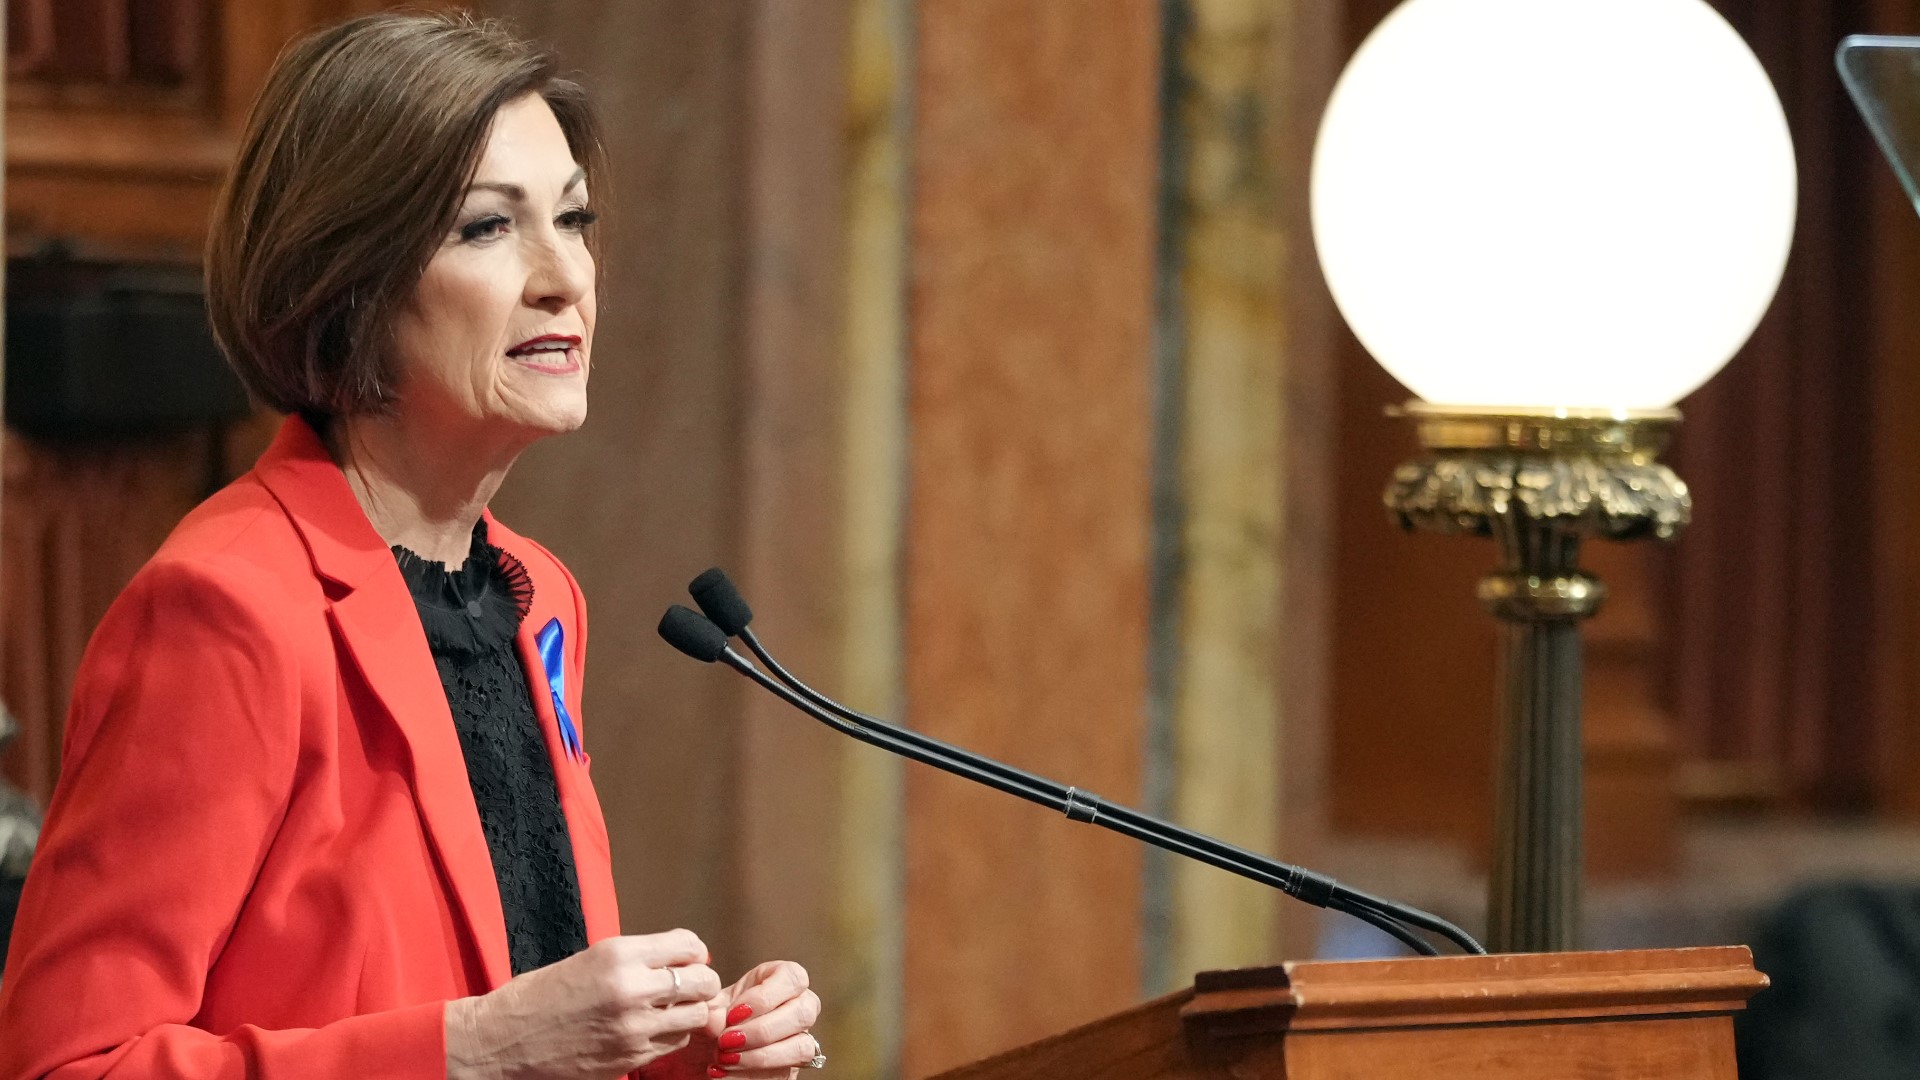 Gov. Kim Reynolds on Tuesday outlined her priorities for the 2024 Iowa Legislature, which includes tax cuts and increased teacher pay.